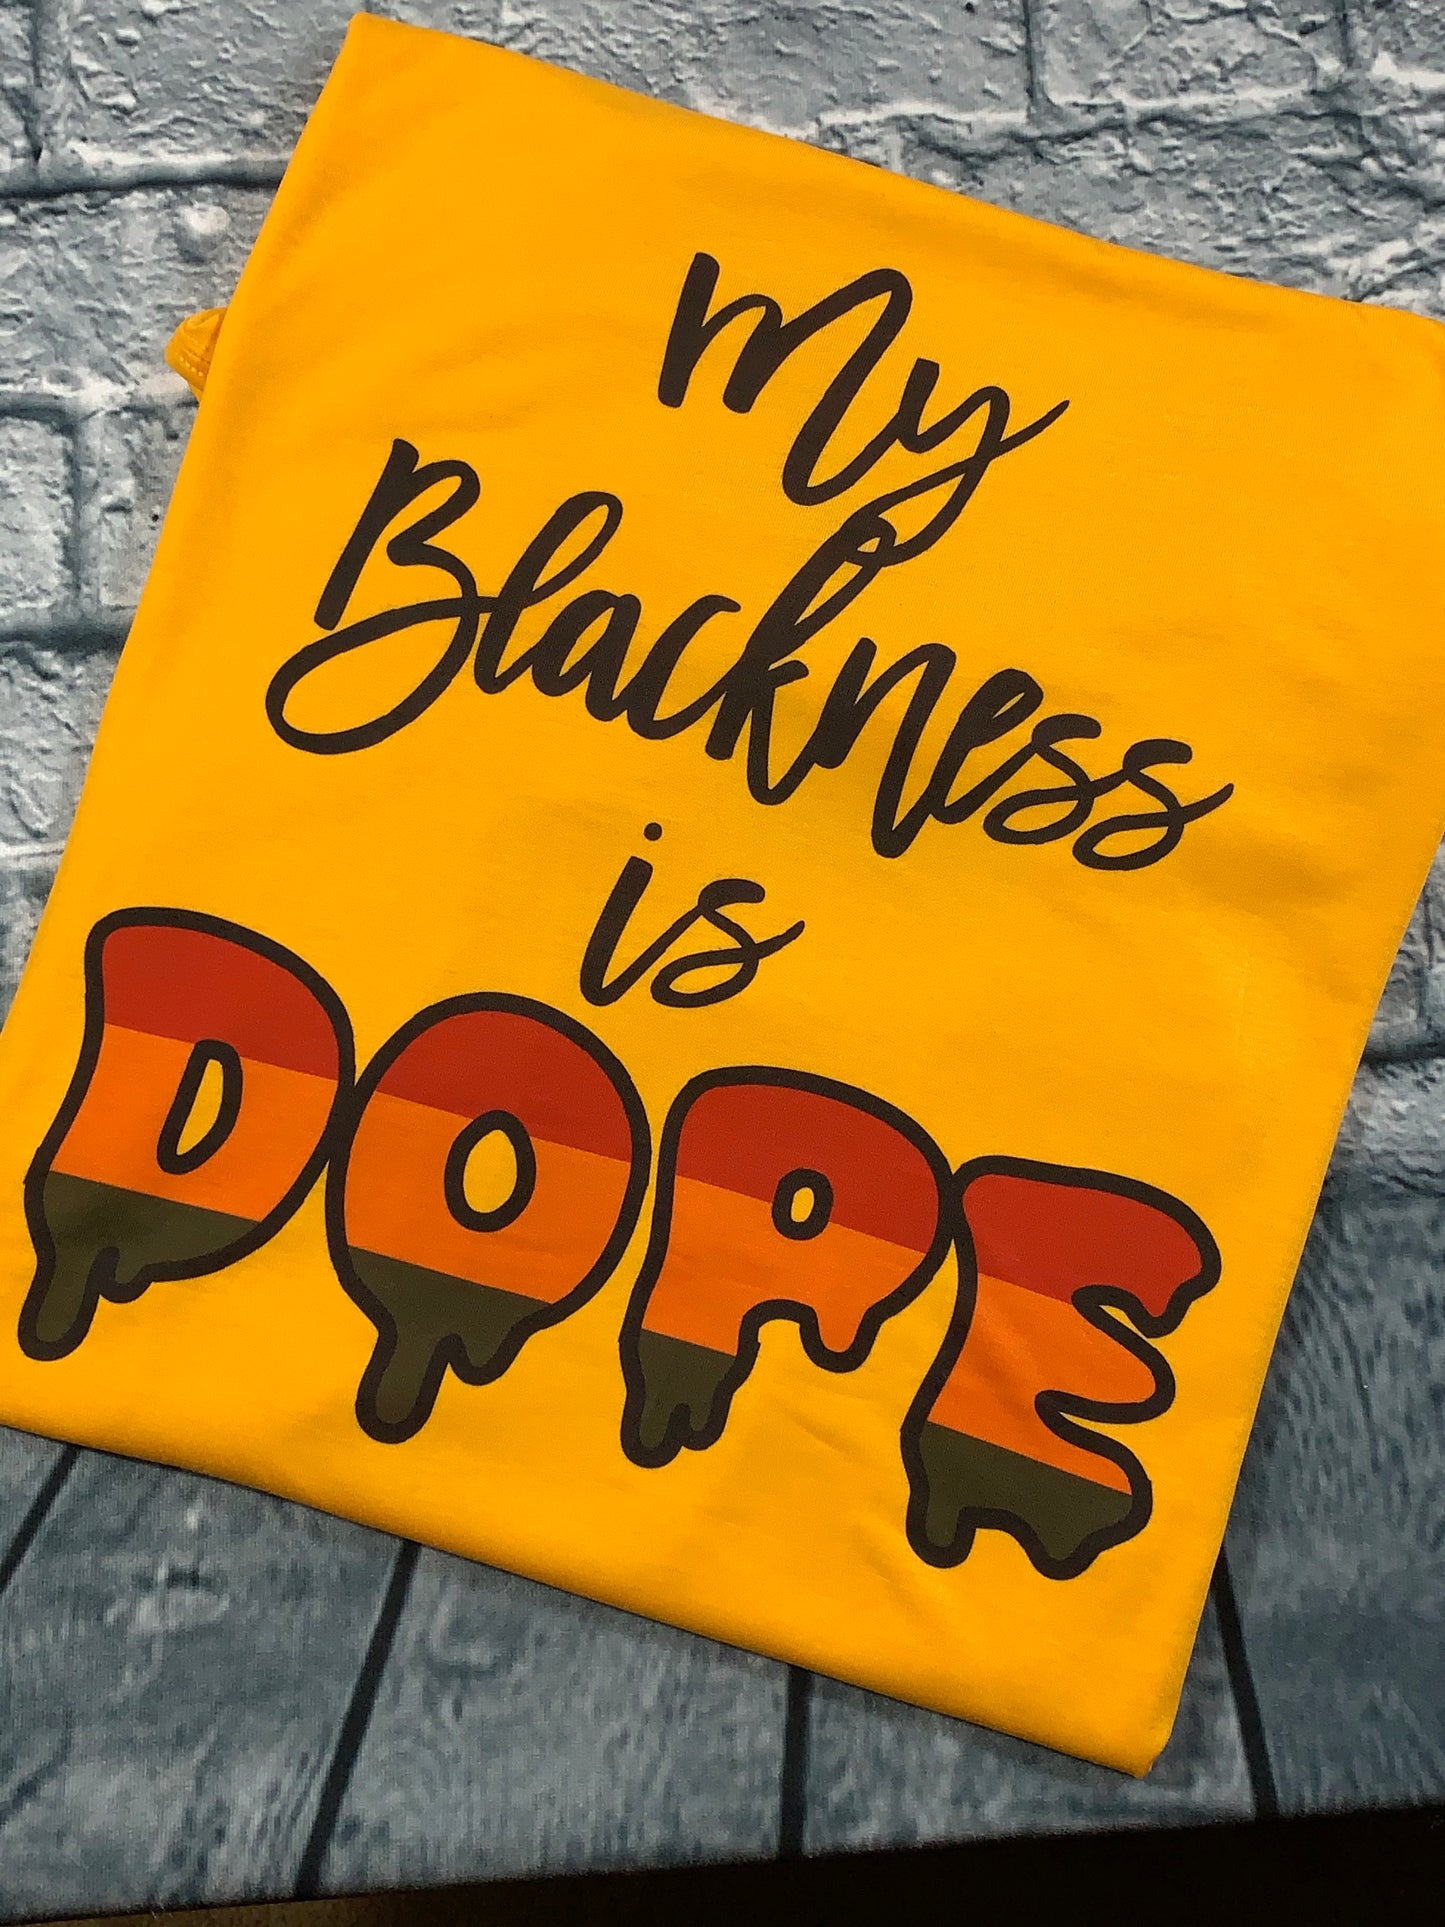 My Blackness is DOPE T-shirt